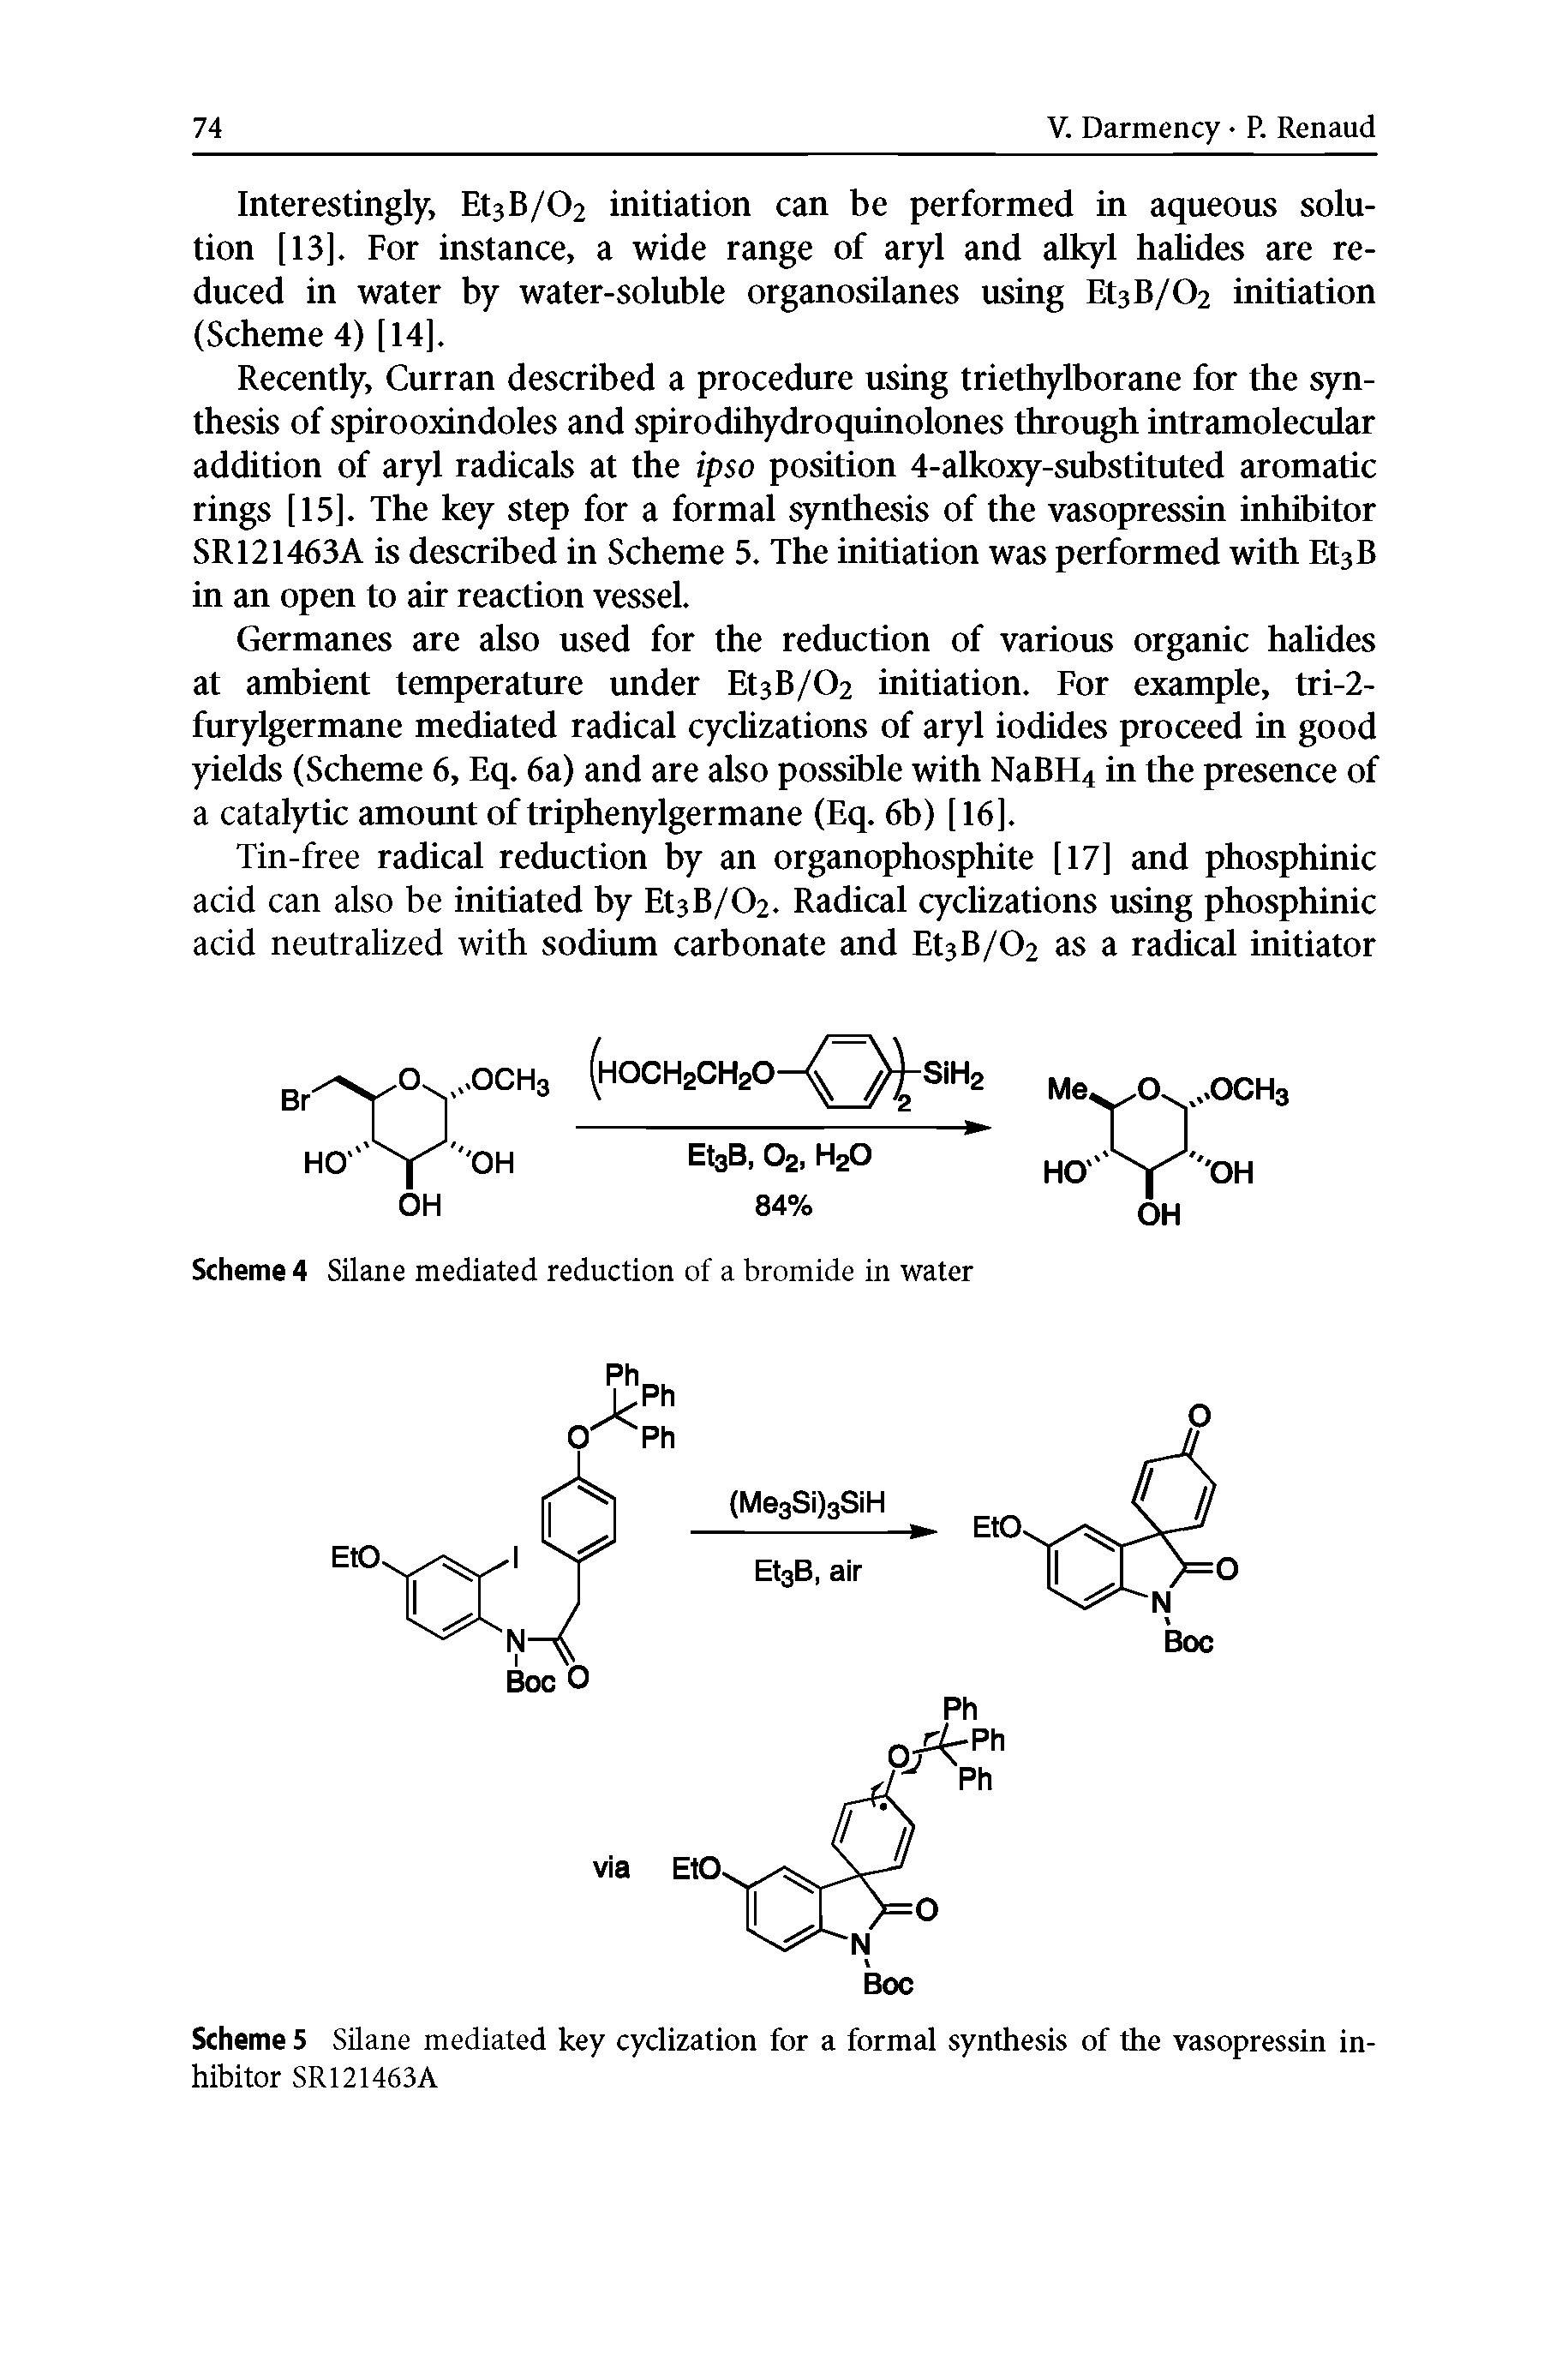 Scheme 5 Silane mediated key cyclization for a formal synthesis of the vasopressin inhibitor SR121463A...